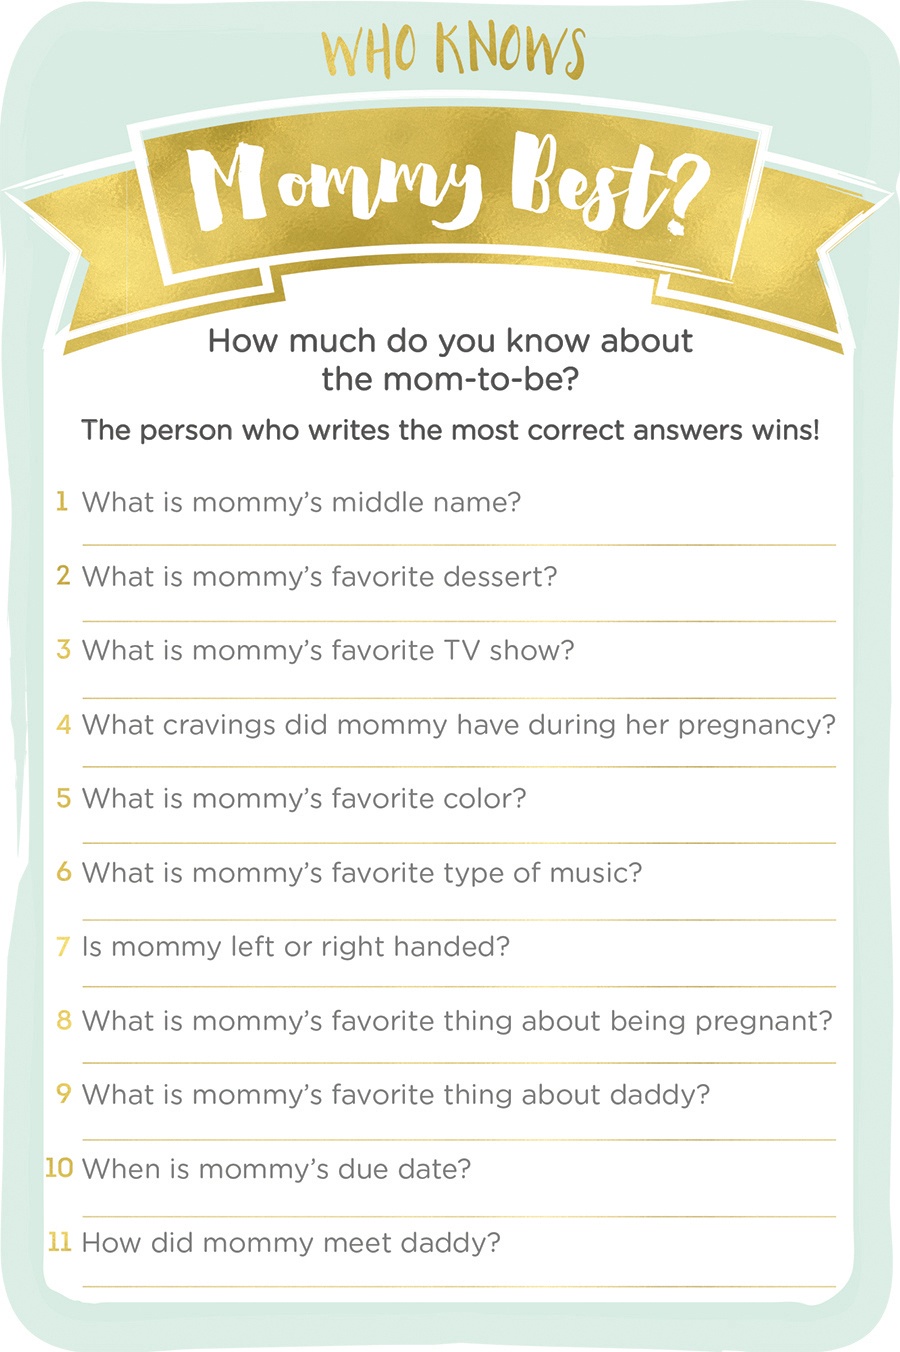 3 Baby Shower Games We Love + Printables - Baby Aspen Blog - Who Knows Mommy Best Free Printable